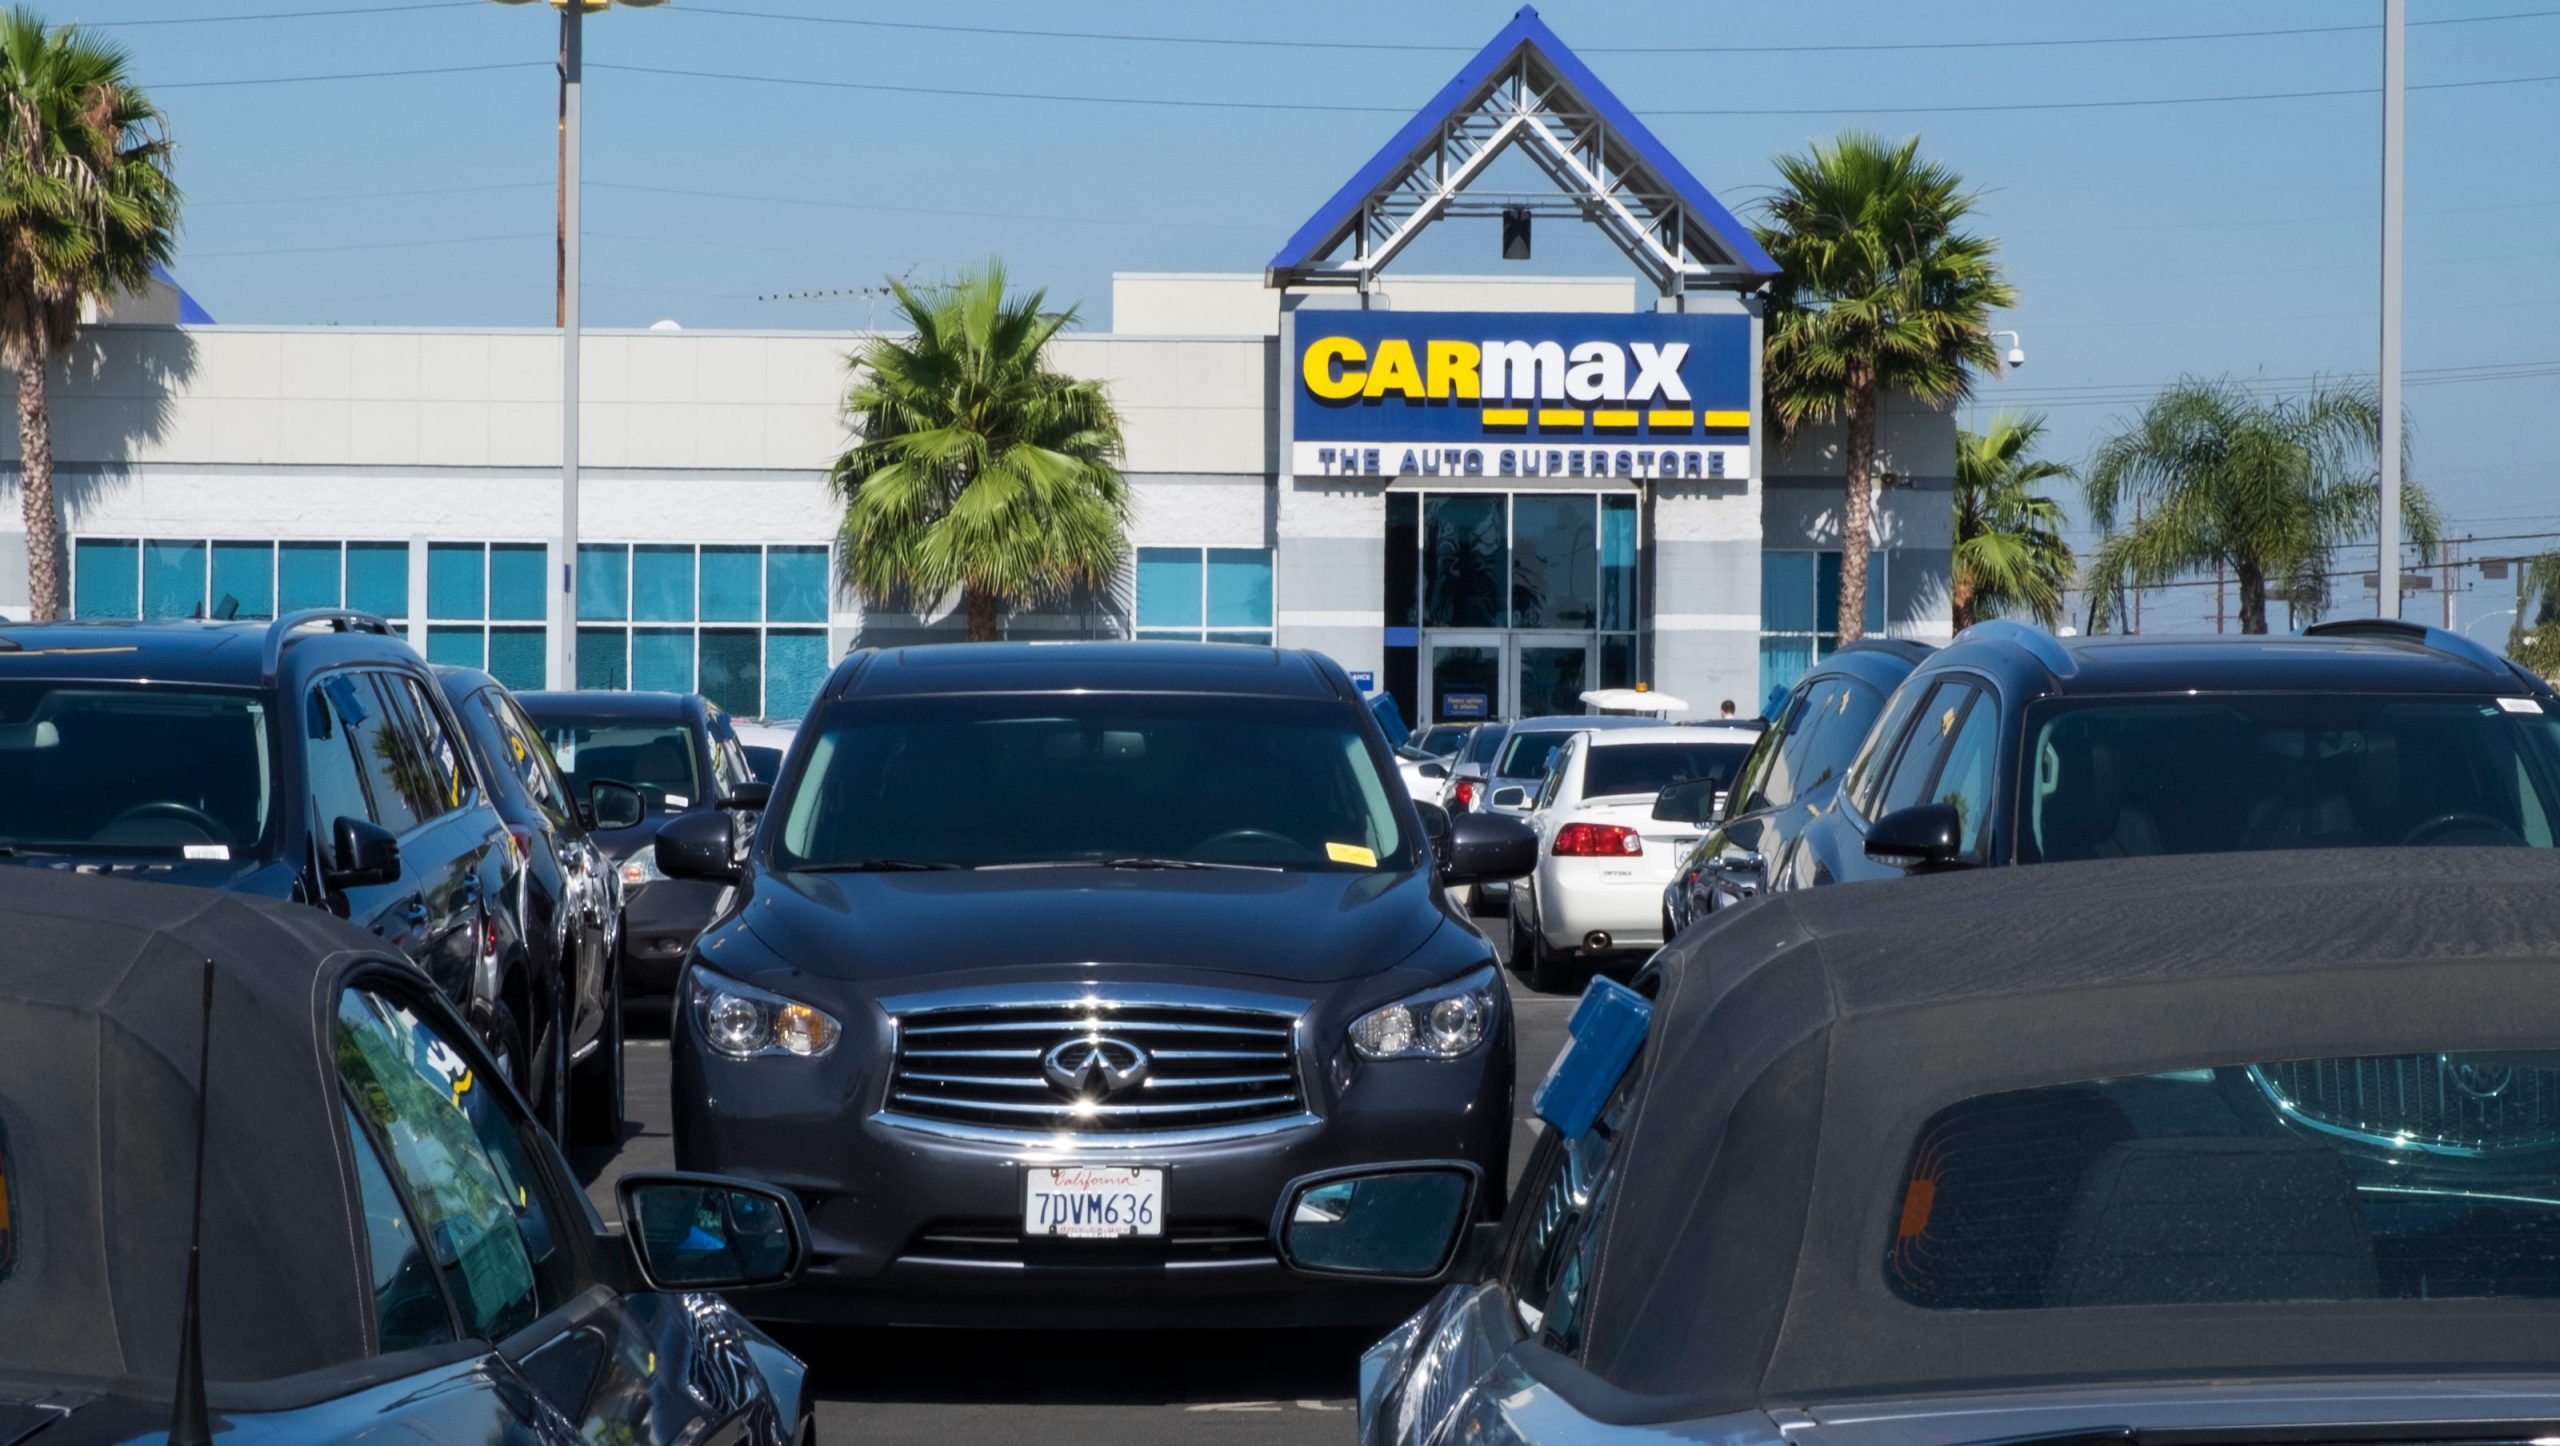 How Many Cars Does Carmax Sell A Month